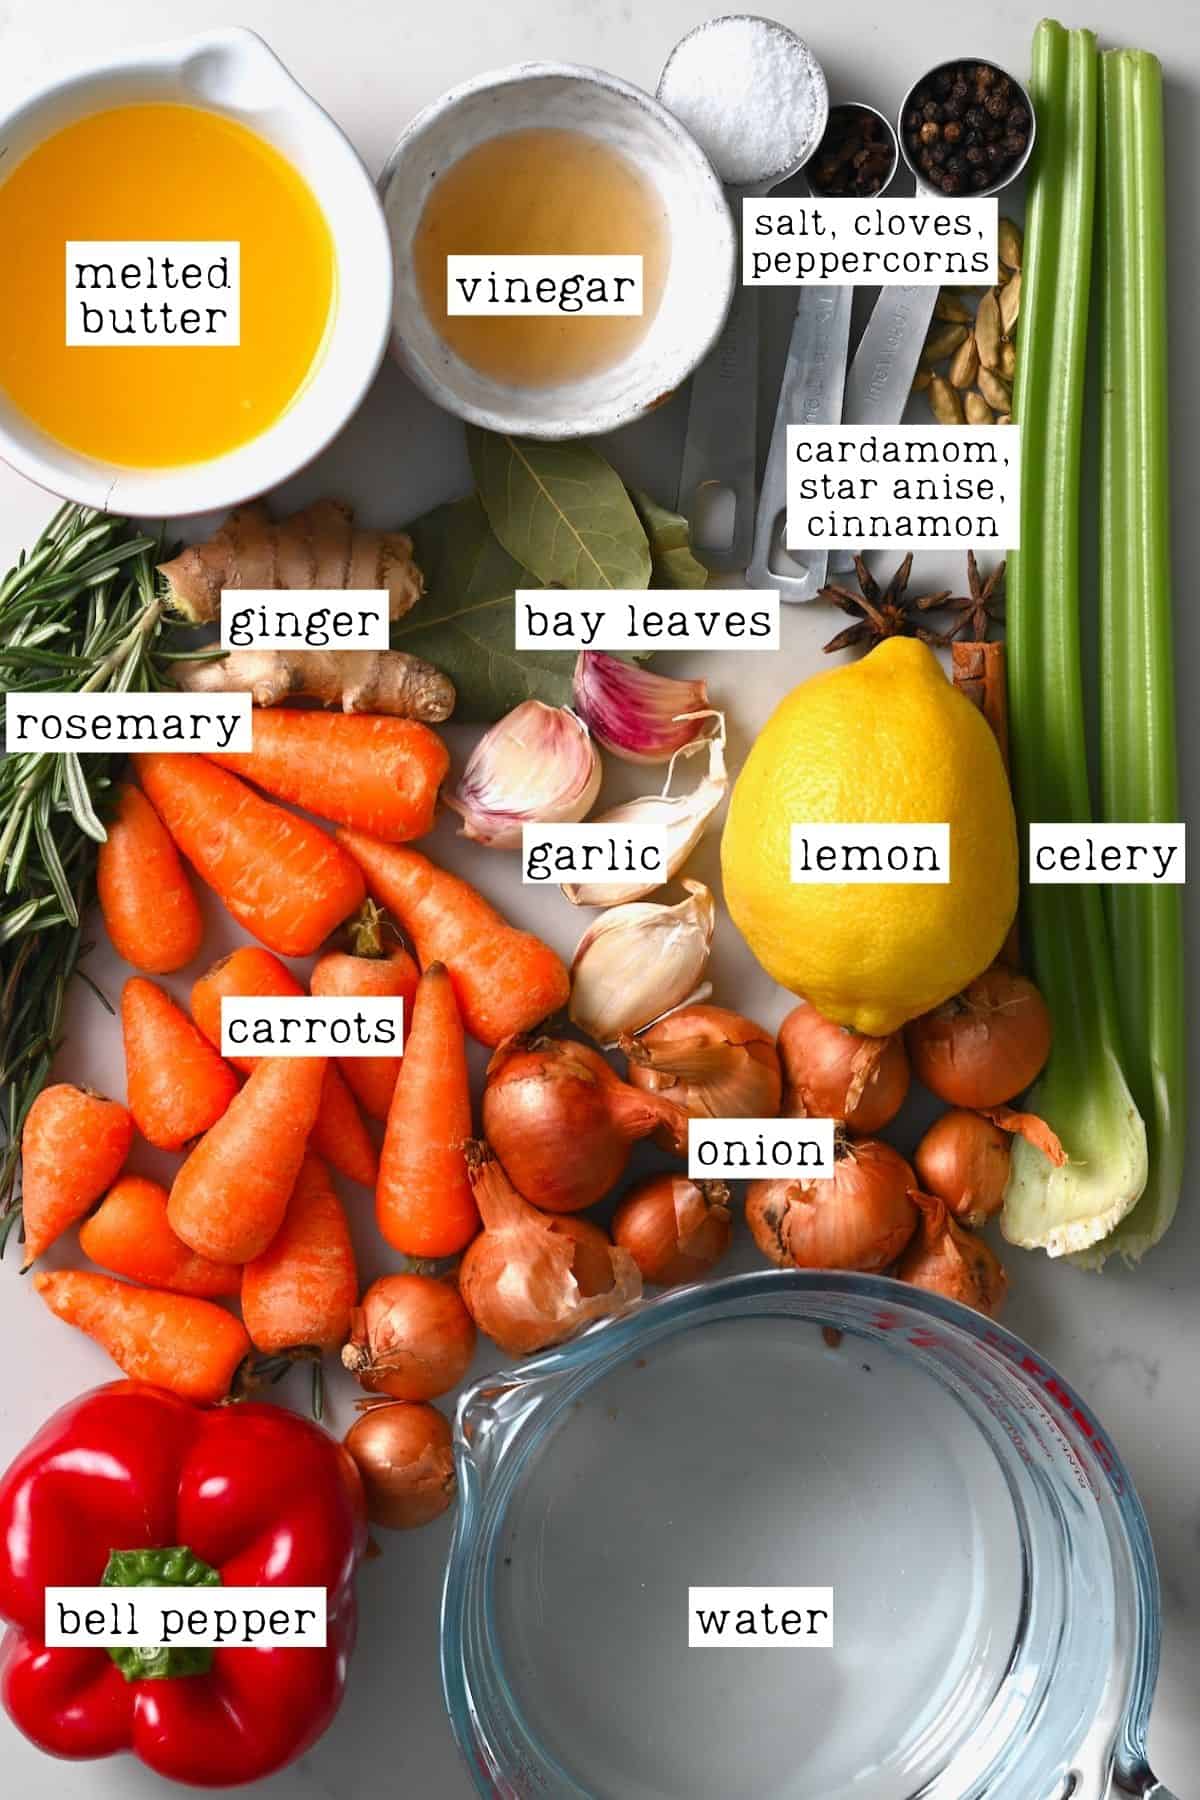 Ingredients for roasted chicken